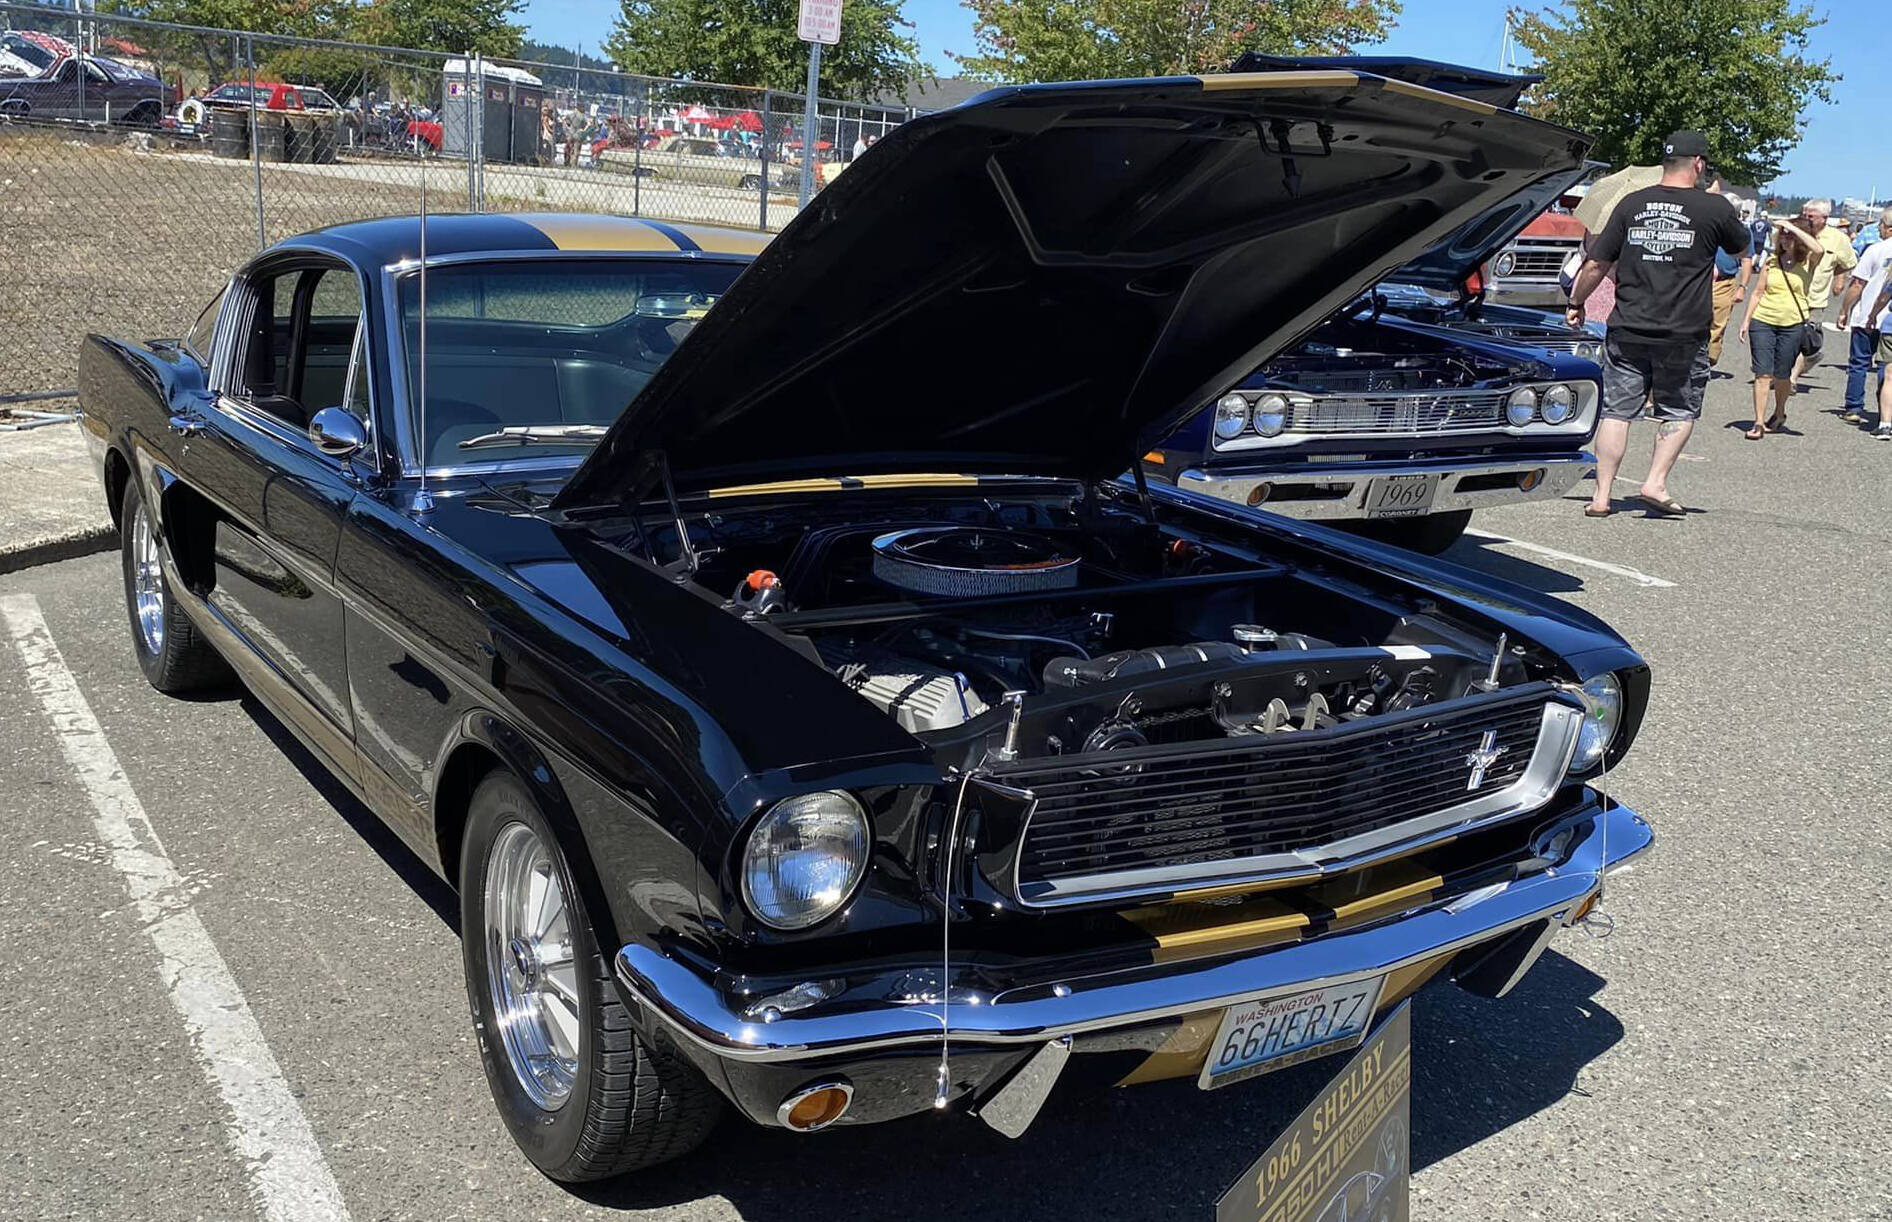 Visitors to the show enjoy looking at the clean engines in the vehicles. This 1966 Shelby was one of hundreds of classic cars on display at the 2022 Saints Car Club Car Cruz.